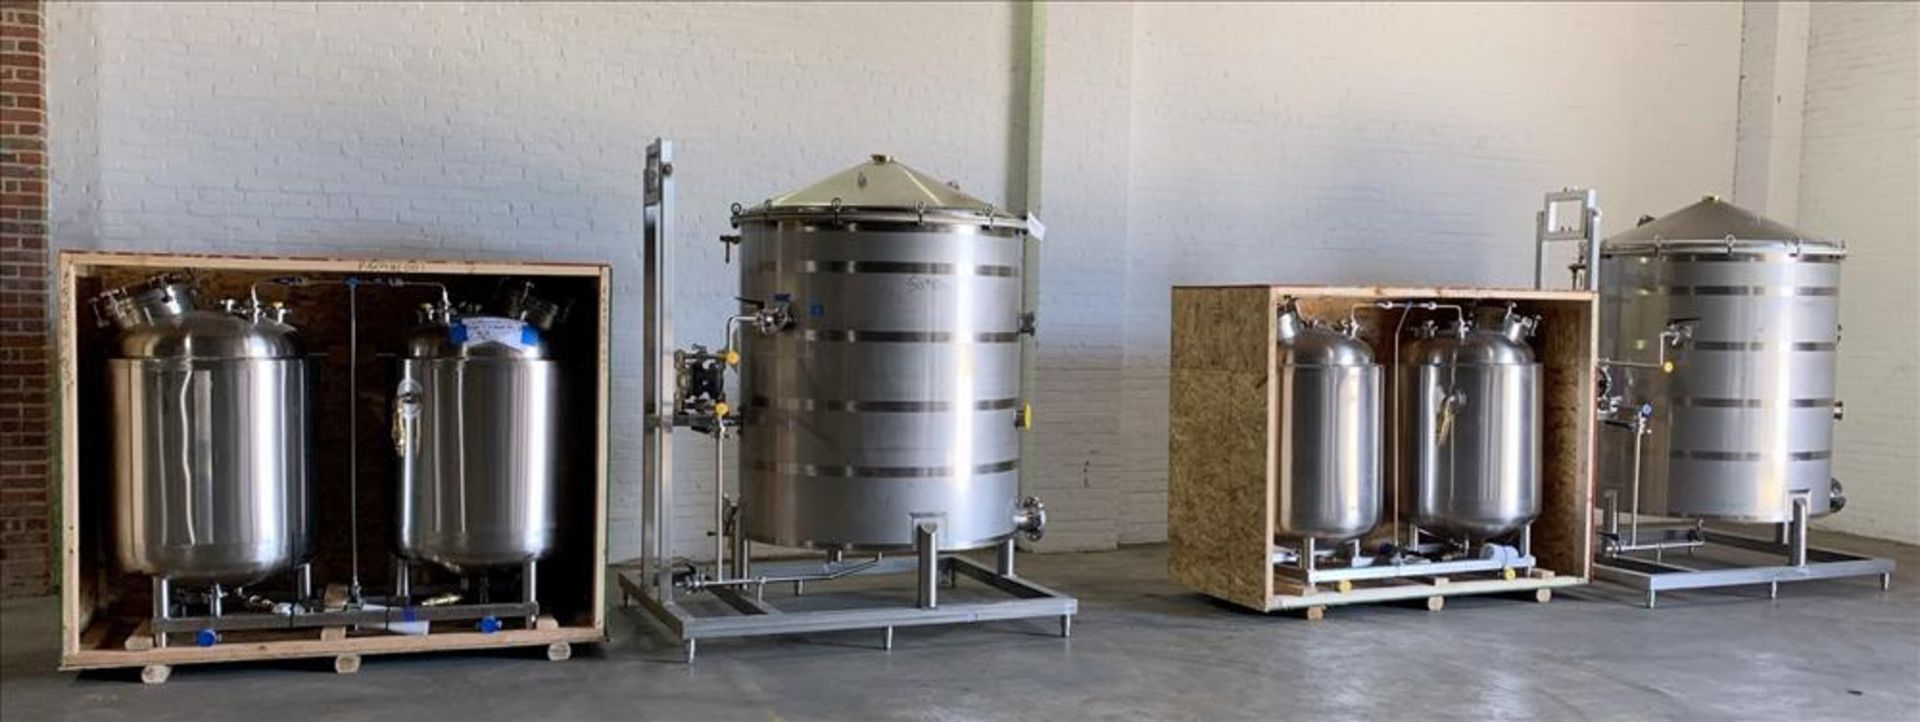 New In Crates - Eden Labs LLC Industrial 500 Gallon Performance Solvent Recovery System